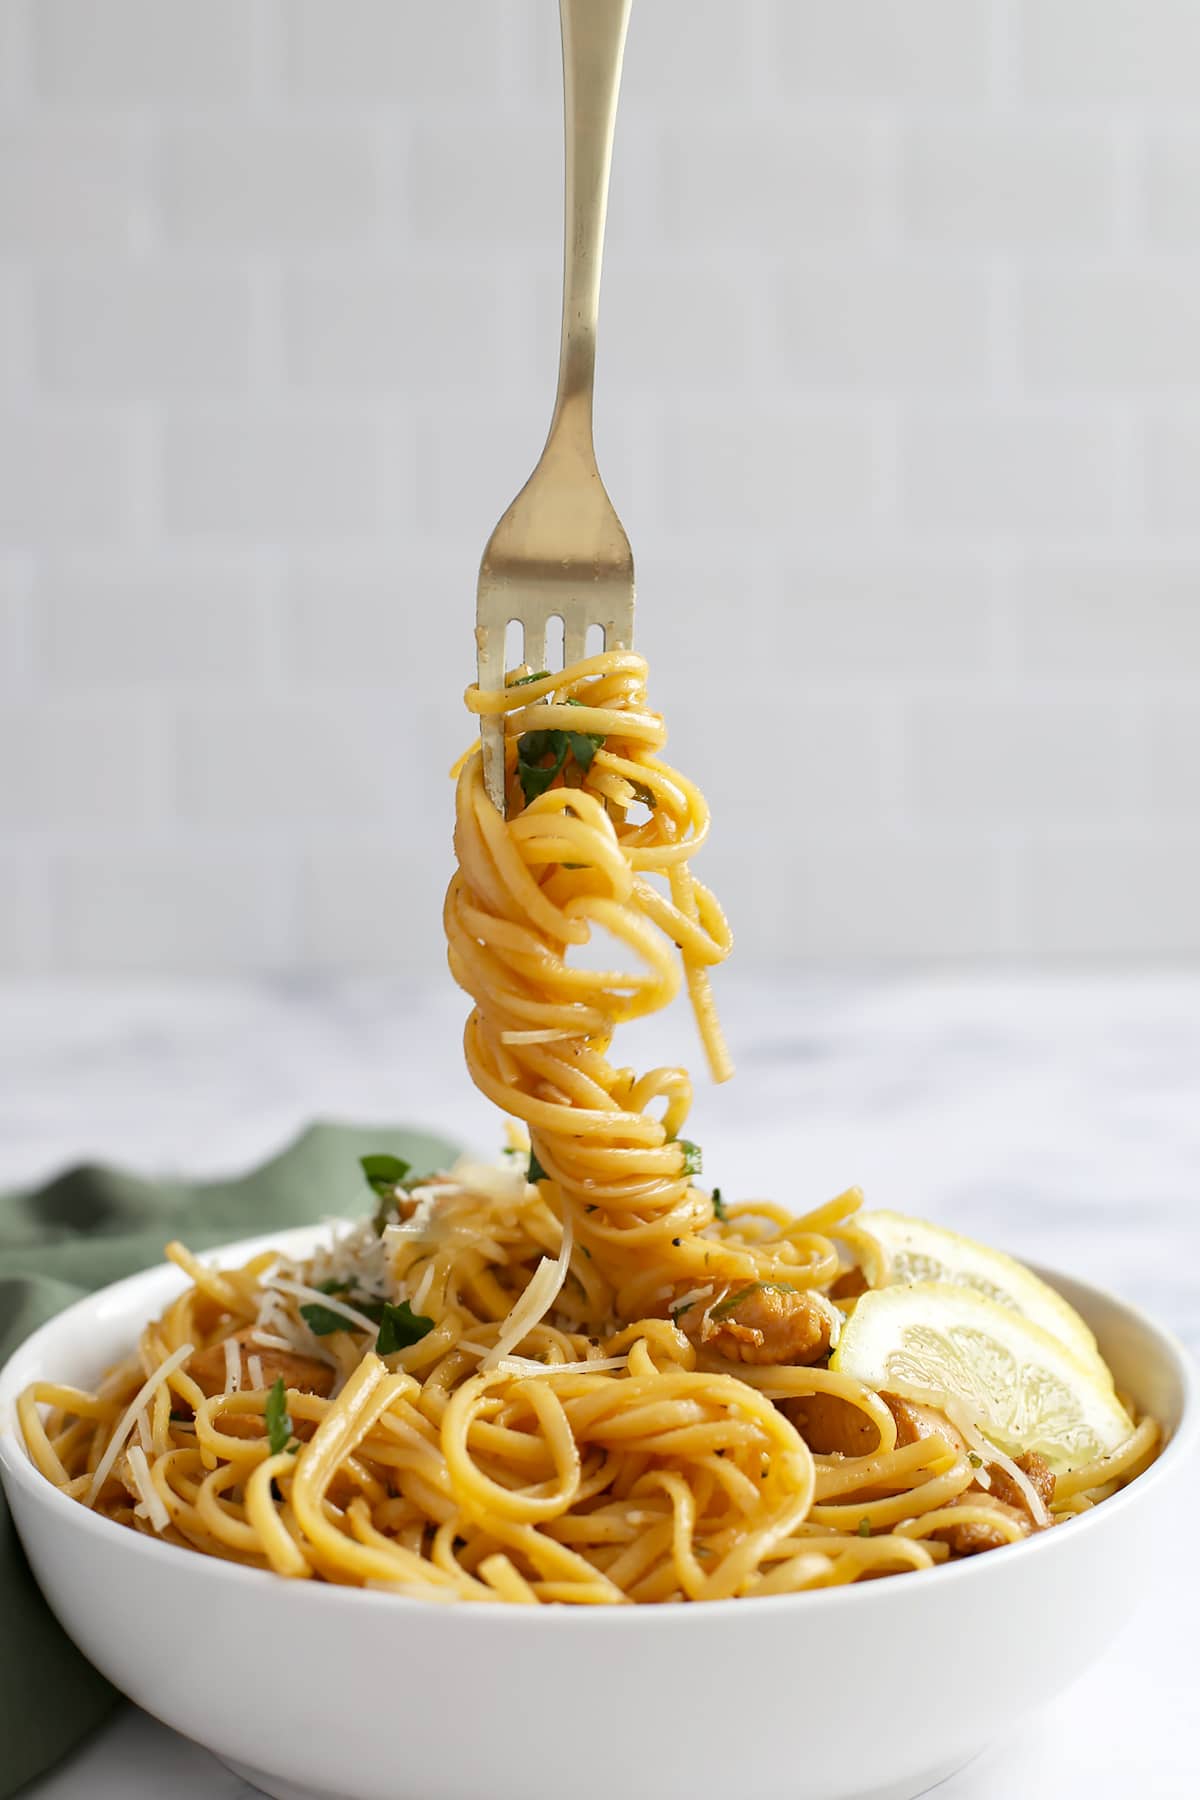 A twirl of pasta noodles on a brass fork being lifted from a bowl of chicken and pasta.